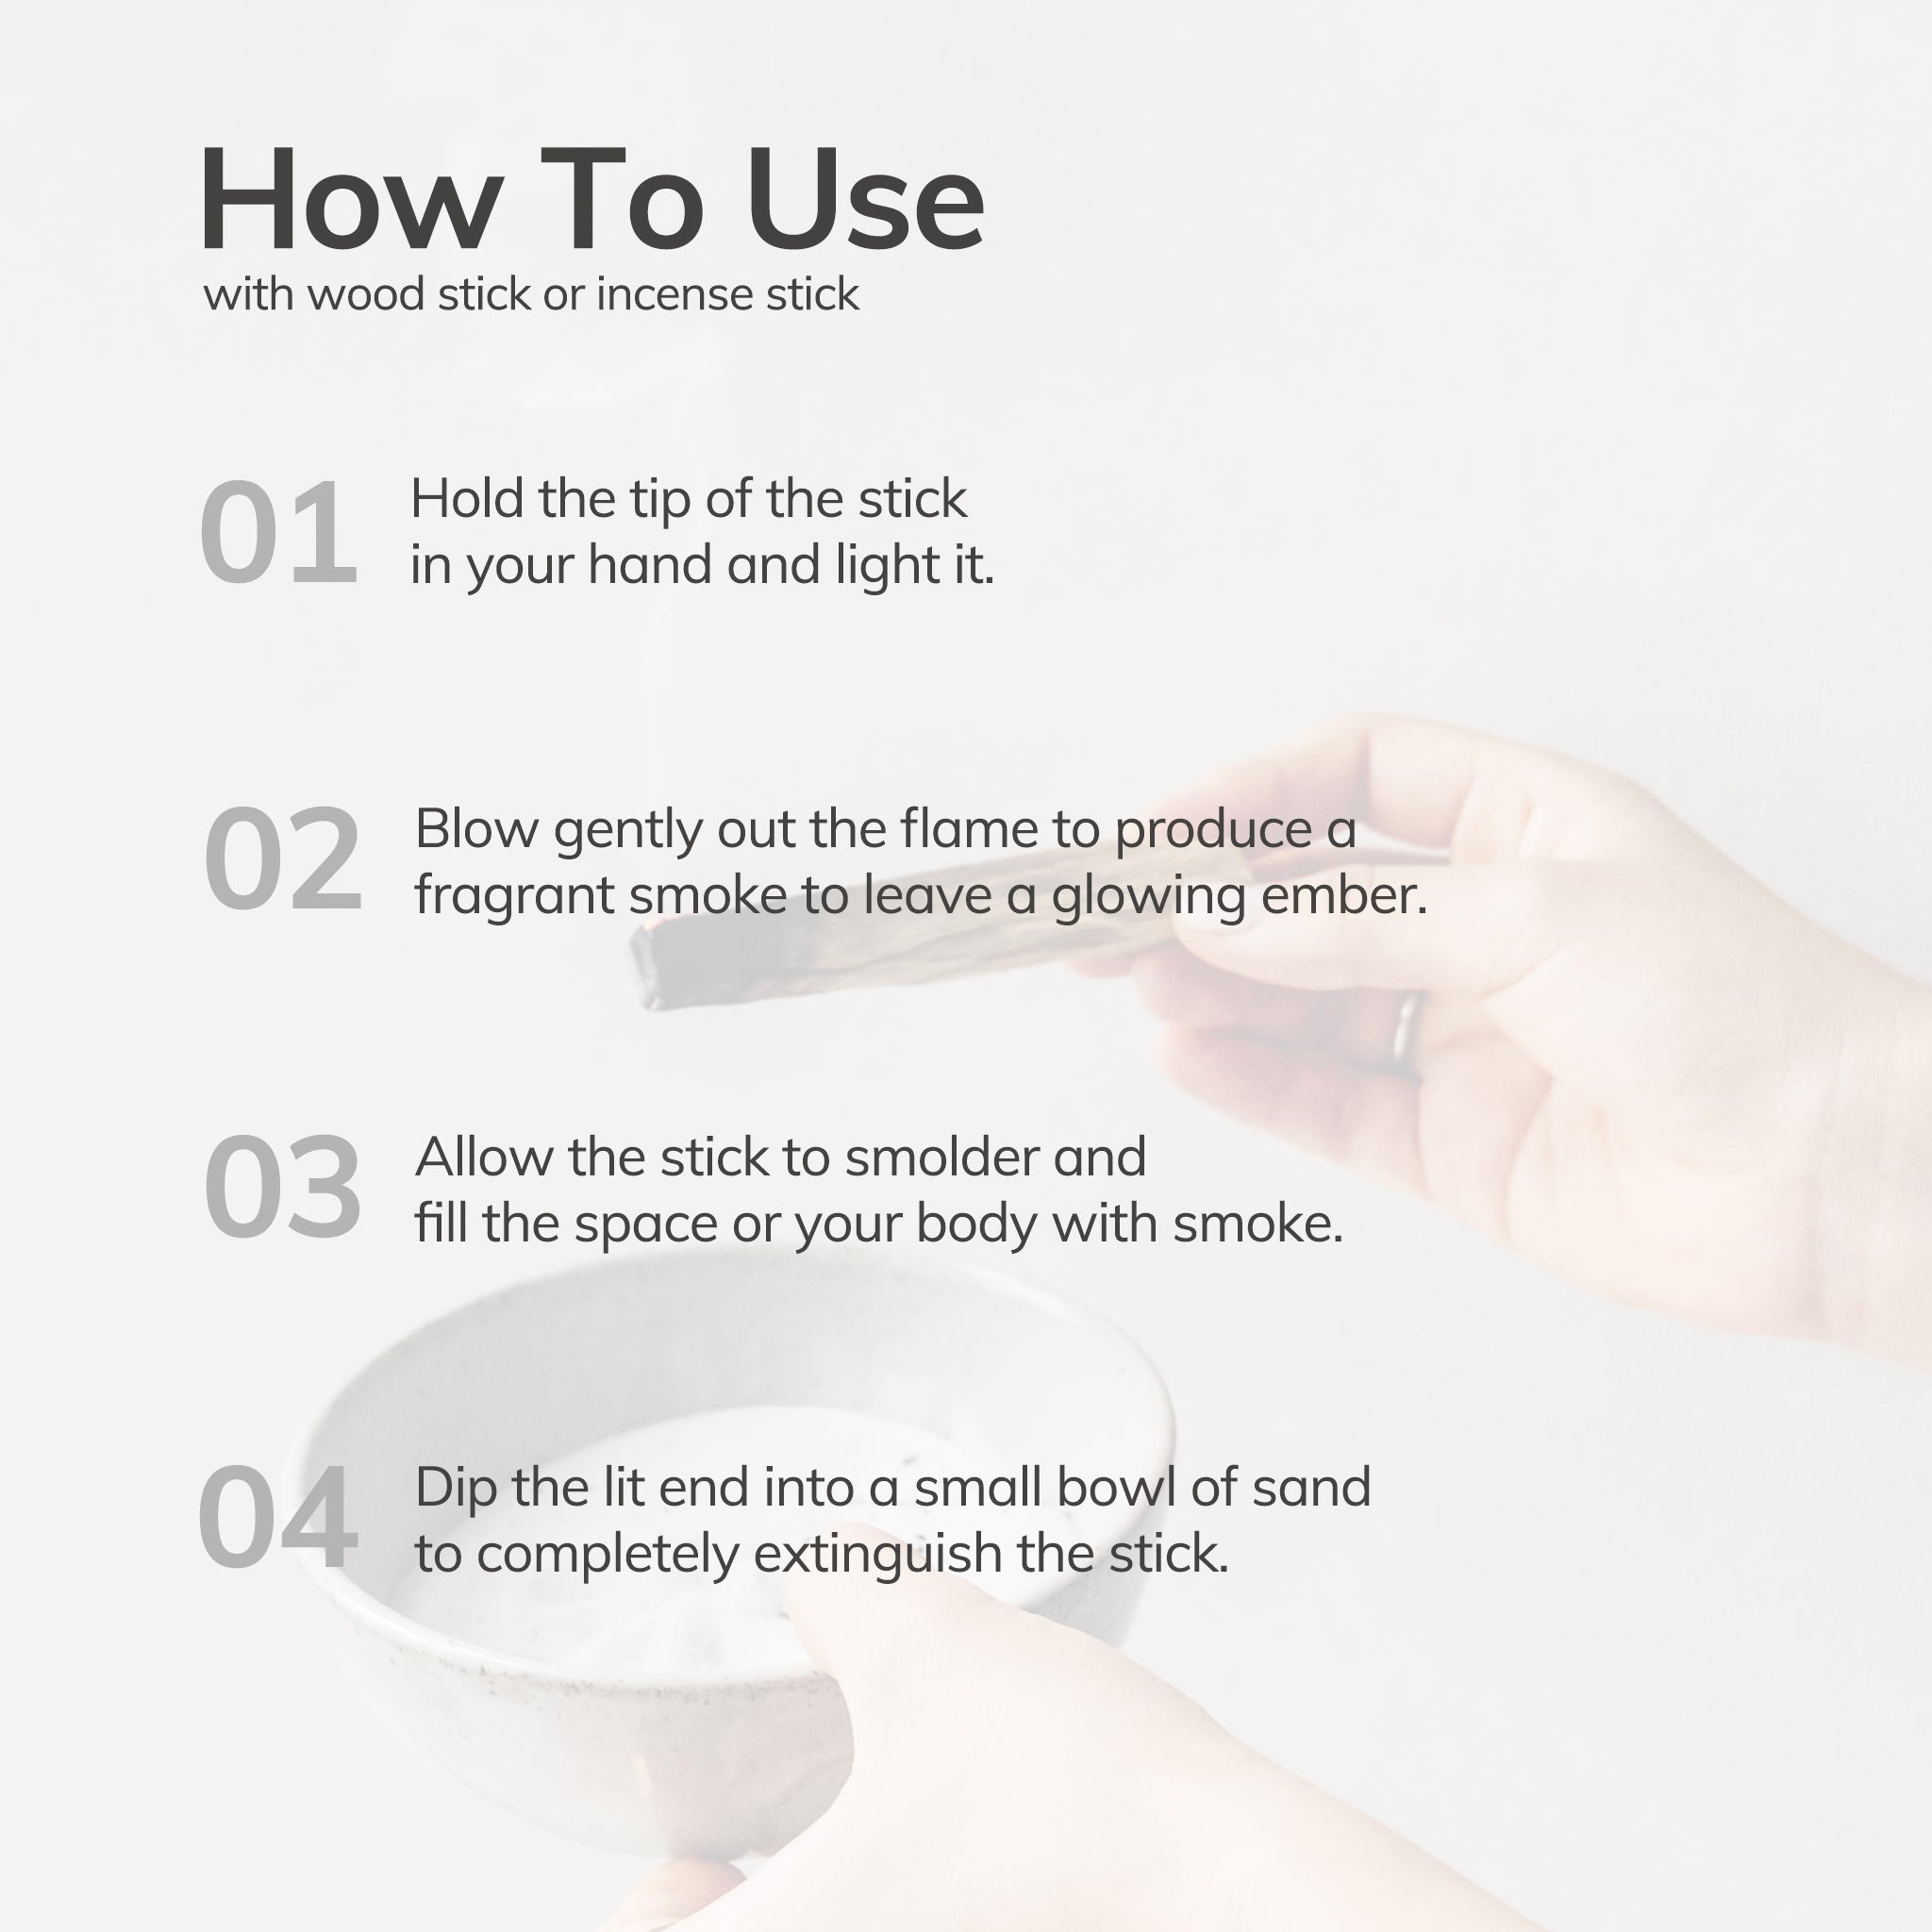 Chronological list of how to use with white sage smudge stick.